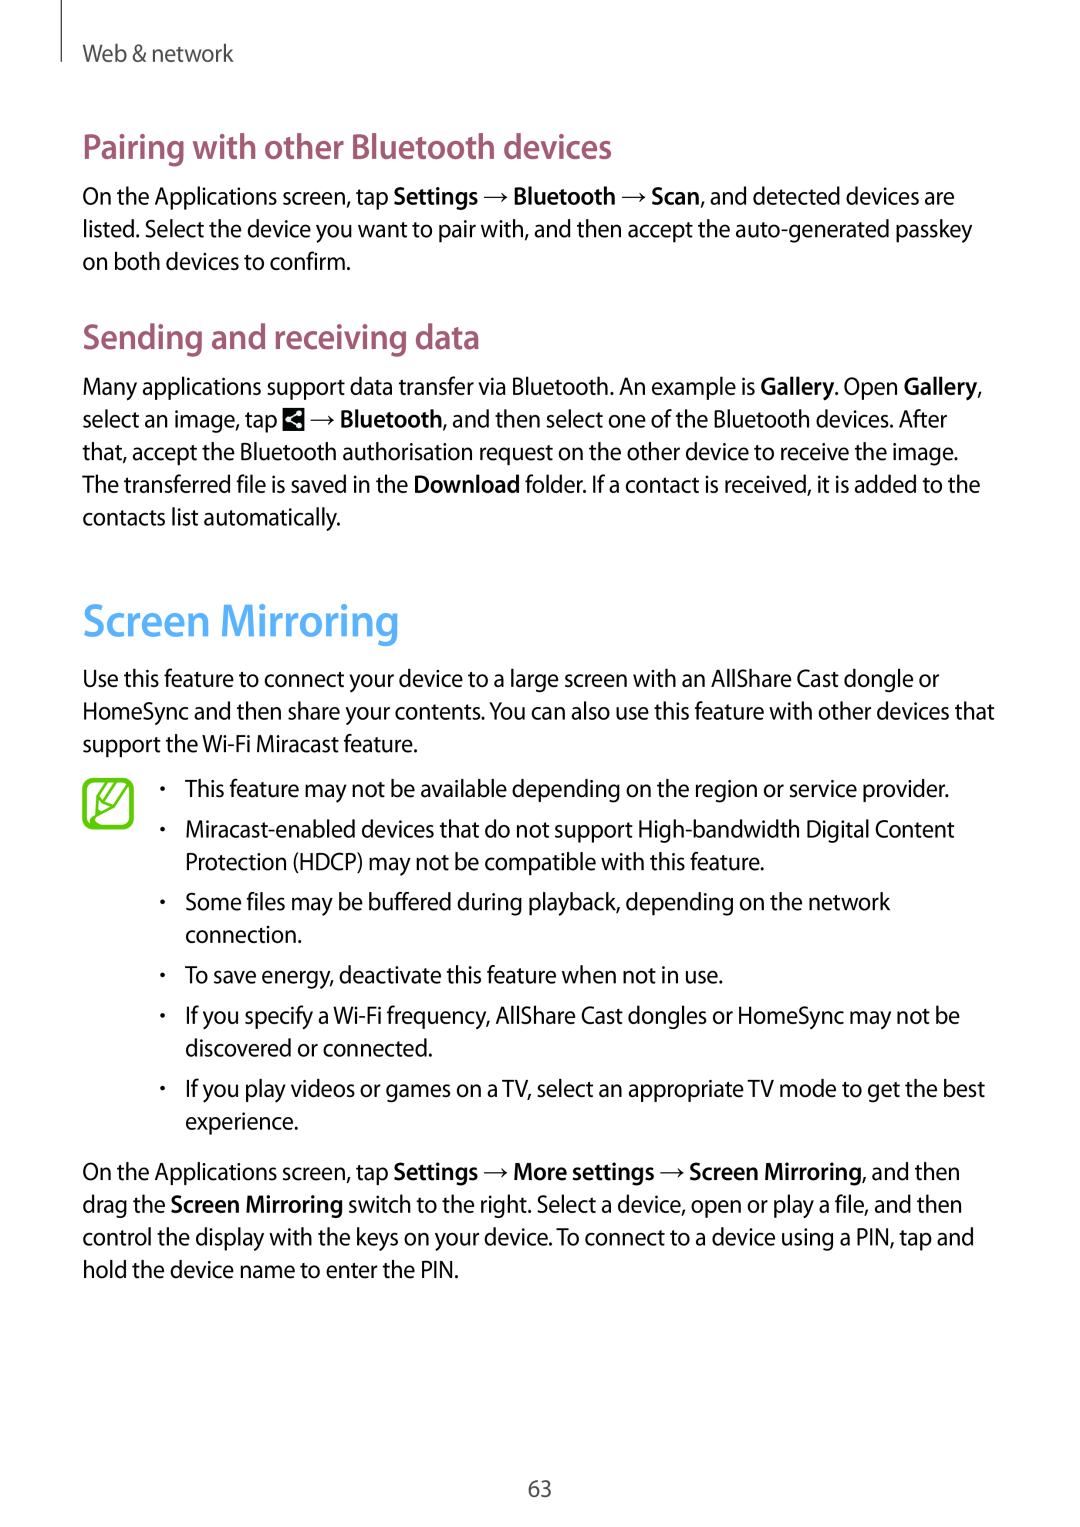 Samsung SM-T3150ZWACRO Screen Mirroring, Pairing with other Bluetooth devices, Sending and receiving data, Web & network 